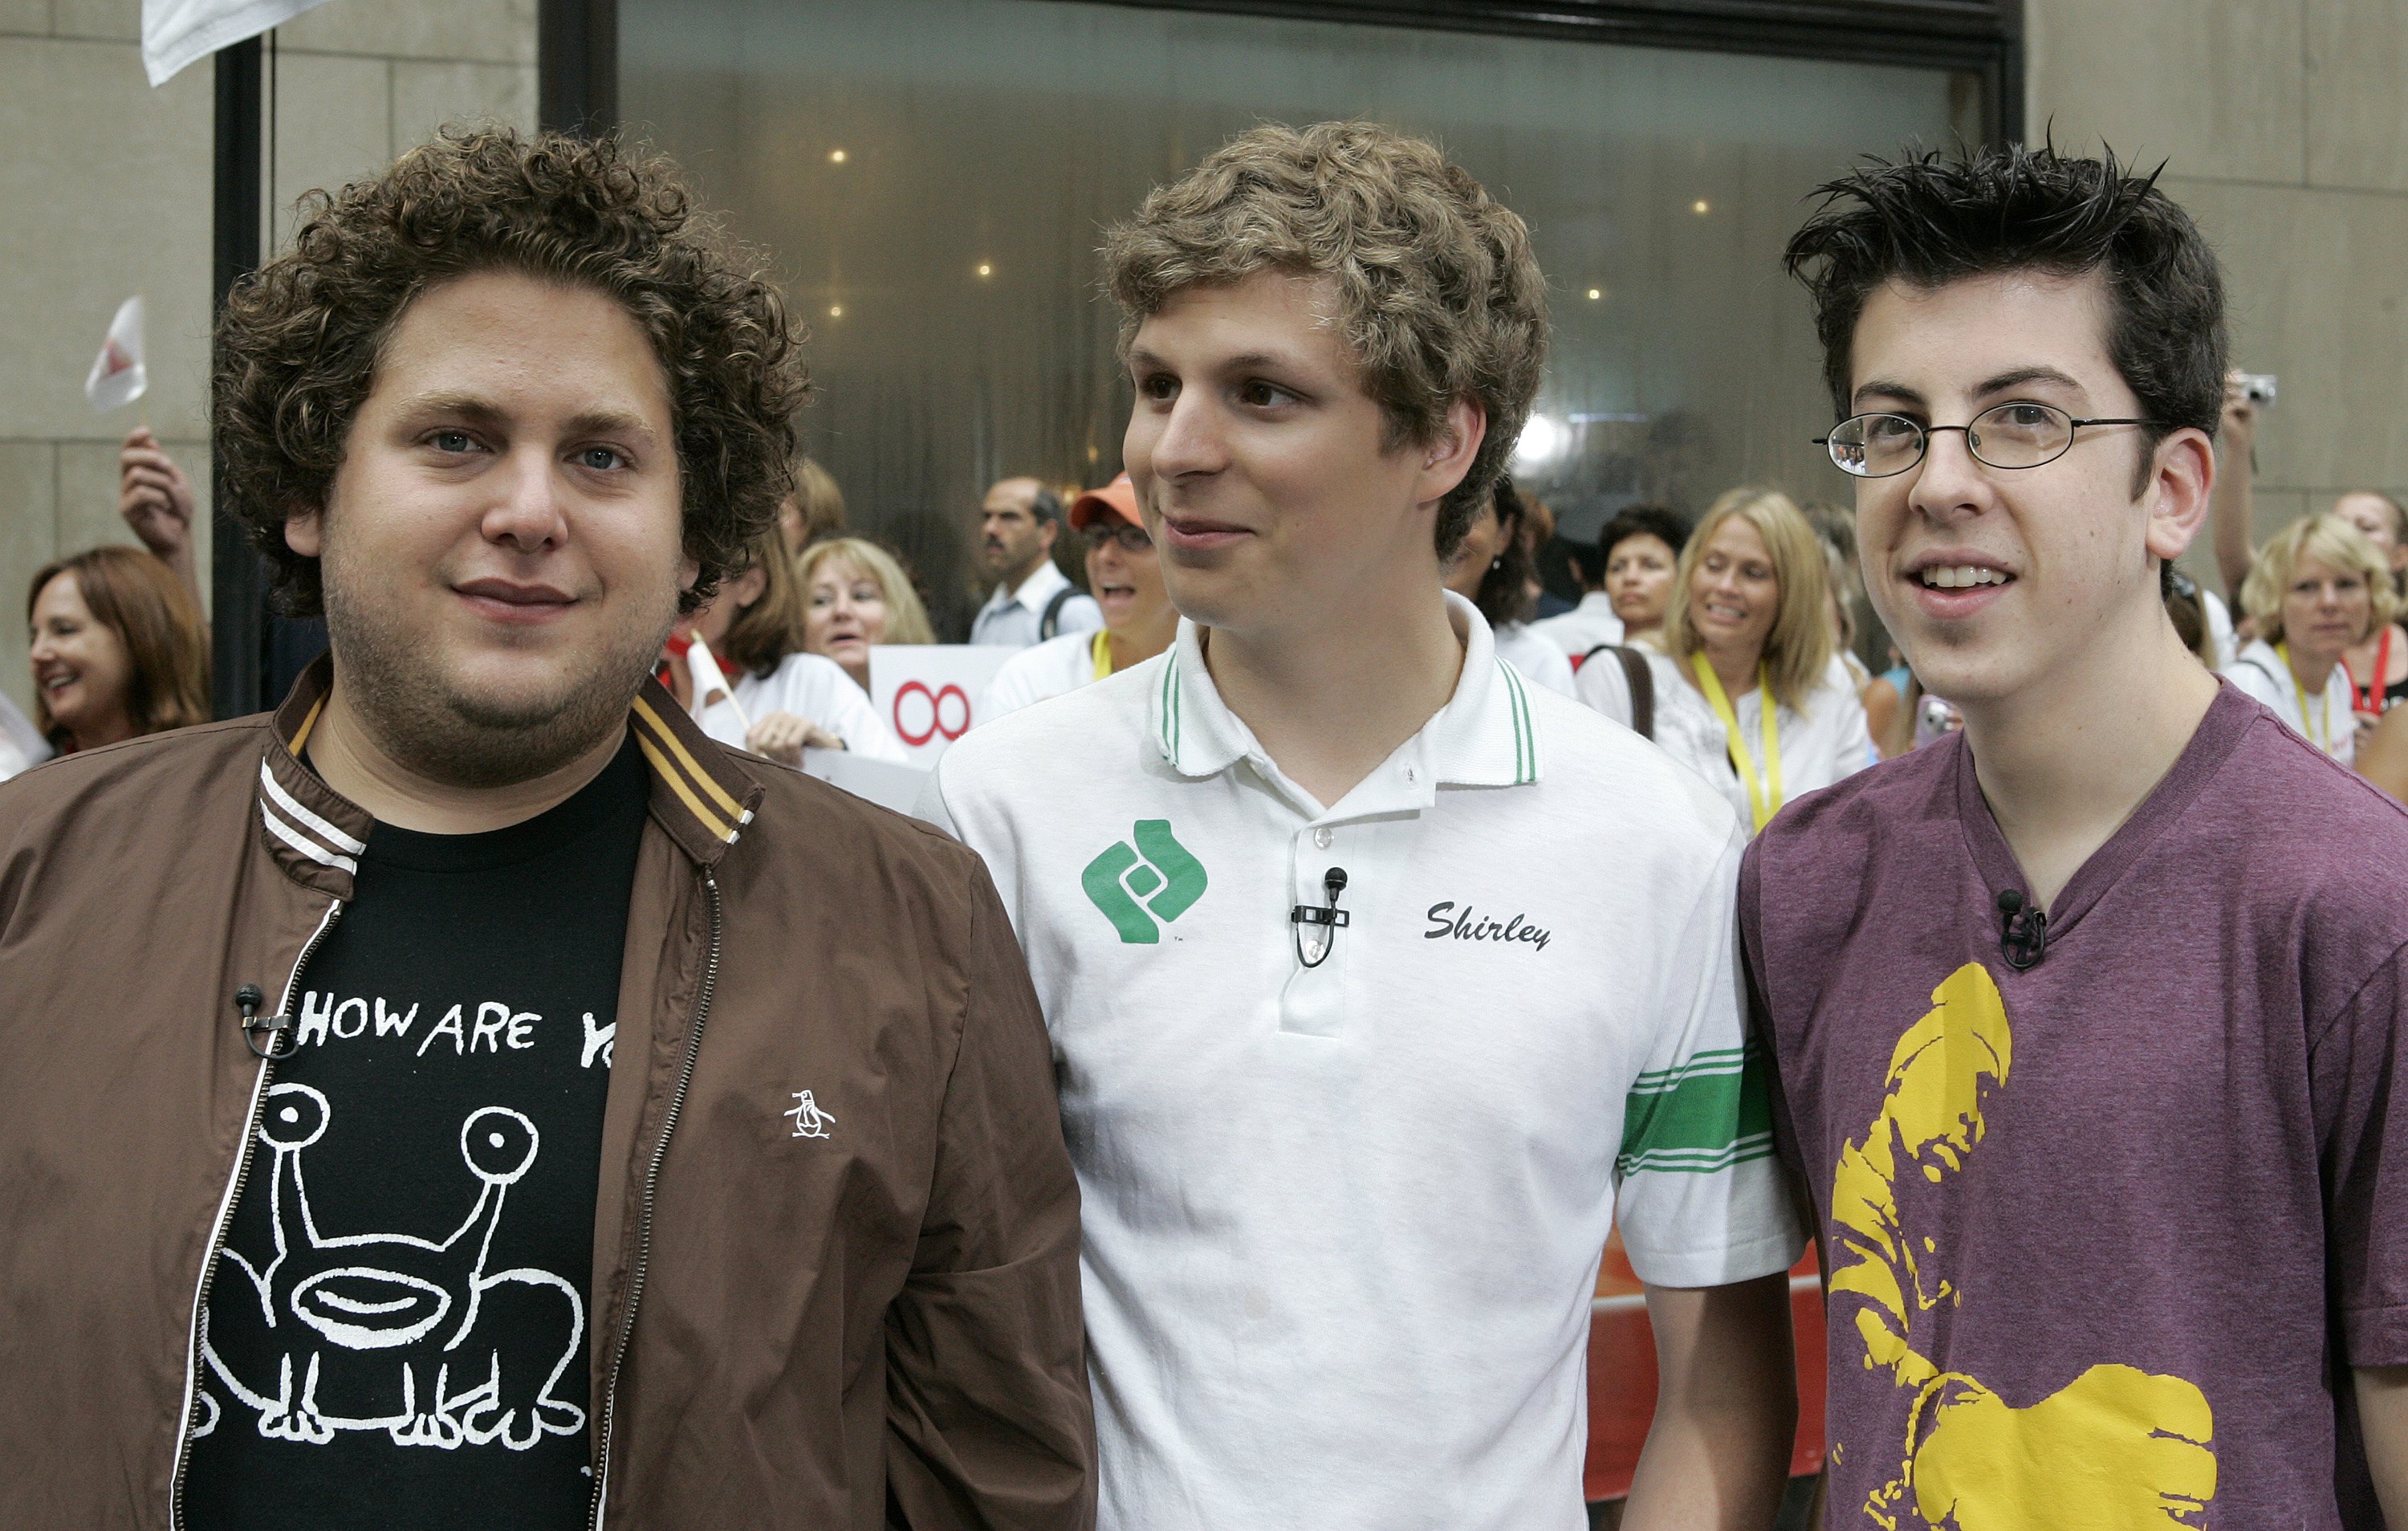 TODAY -- Pictured: (l-r) Actors Jonah Hill, Michael Ceraz and Christopher Mintz-Plasse of "Superbad" stop by the Plaza on NBC News' TODAY on August 8, 2007 (NBC NewsWire&mdash;NBC NewsWire via Getty Images)